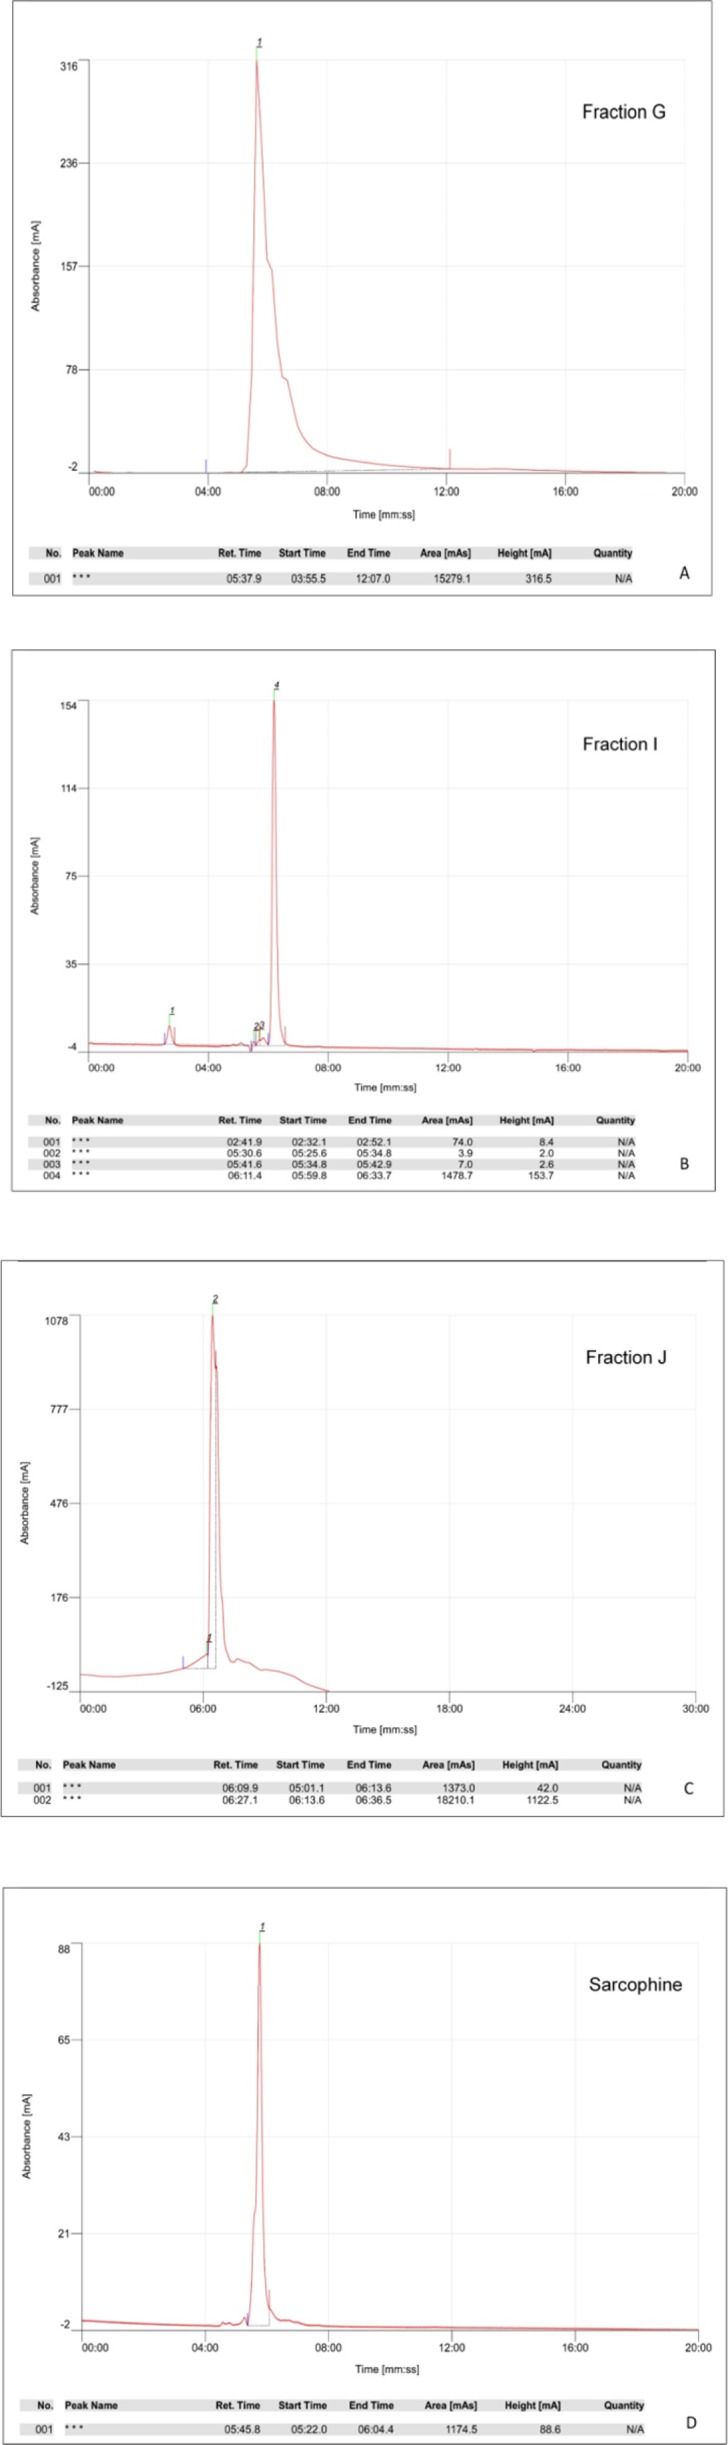 HPLC chromatograms of 20 µL injection of fraction G, I, J and Sarcophine which showed in panels A, B, C and D, respectively